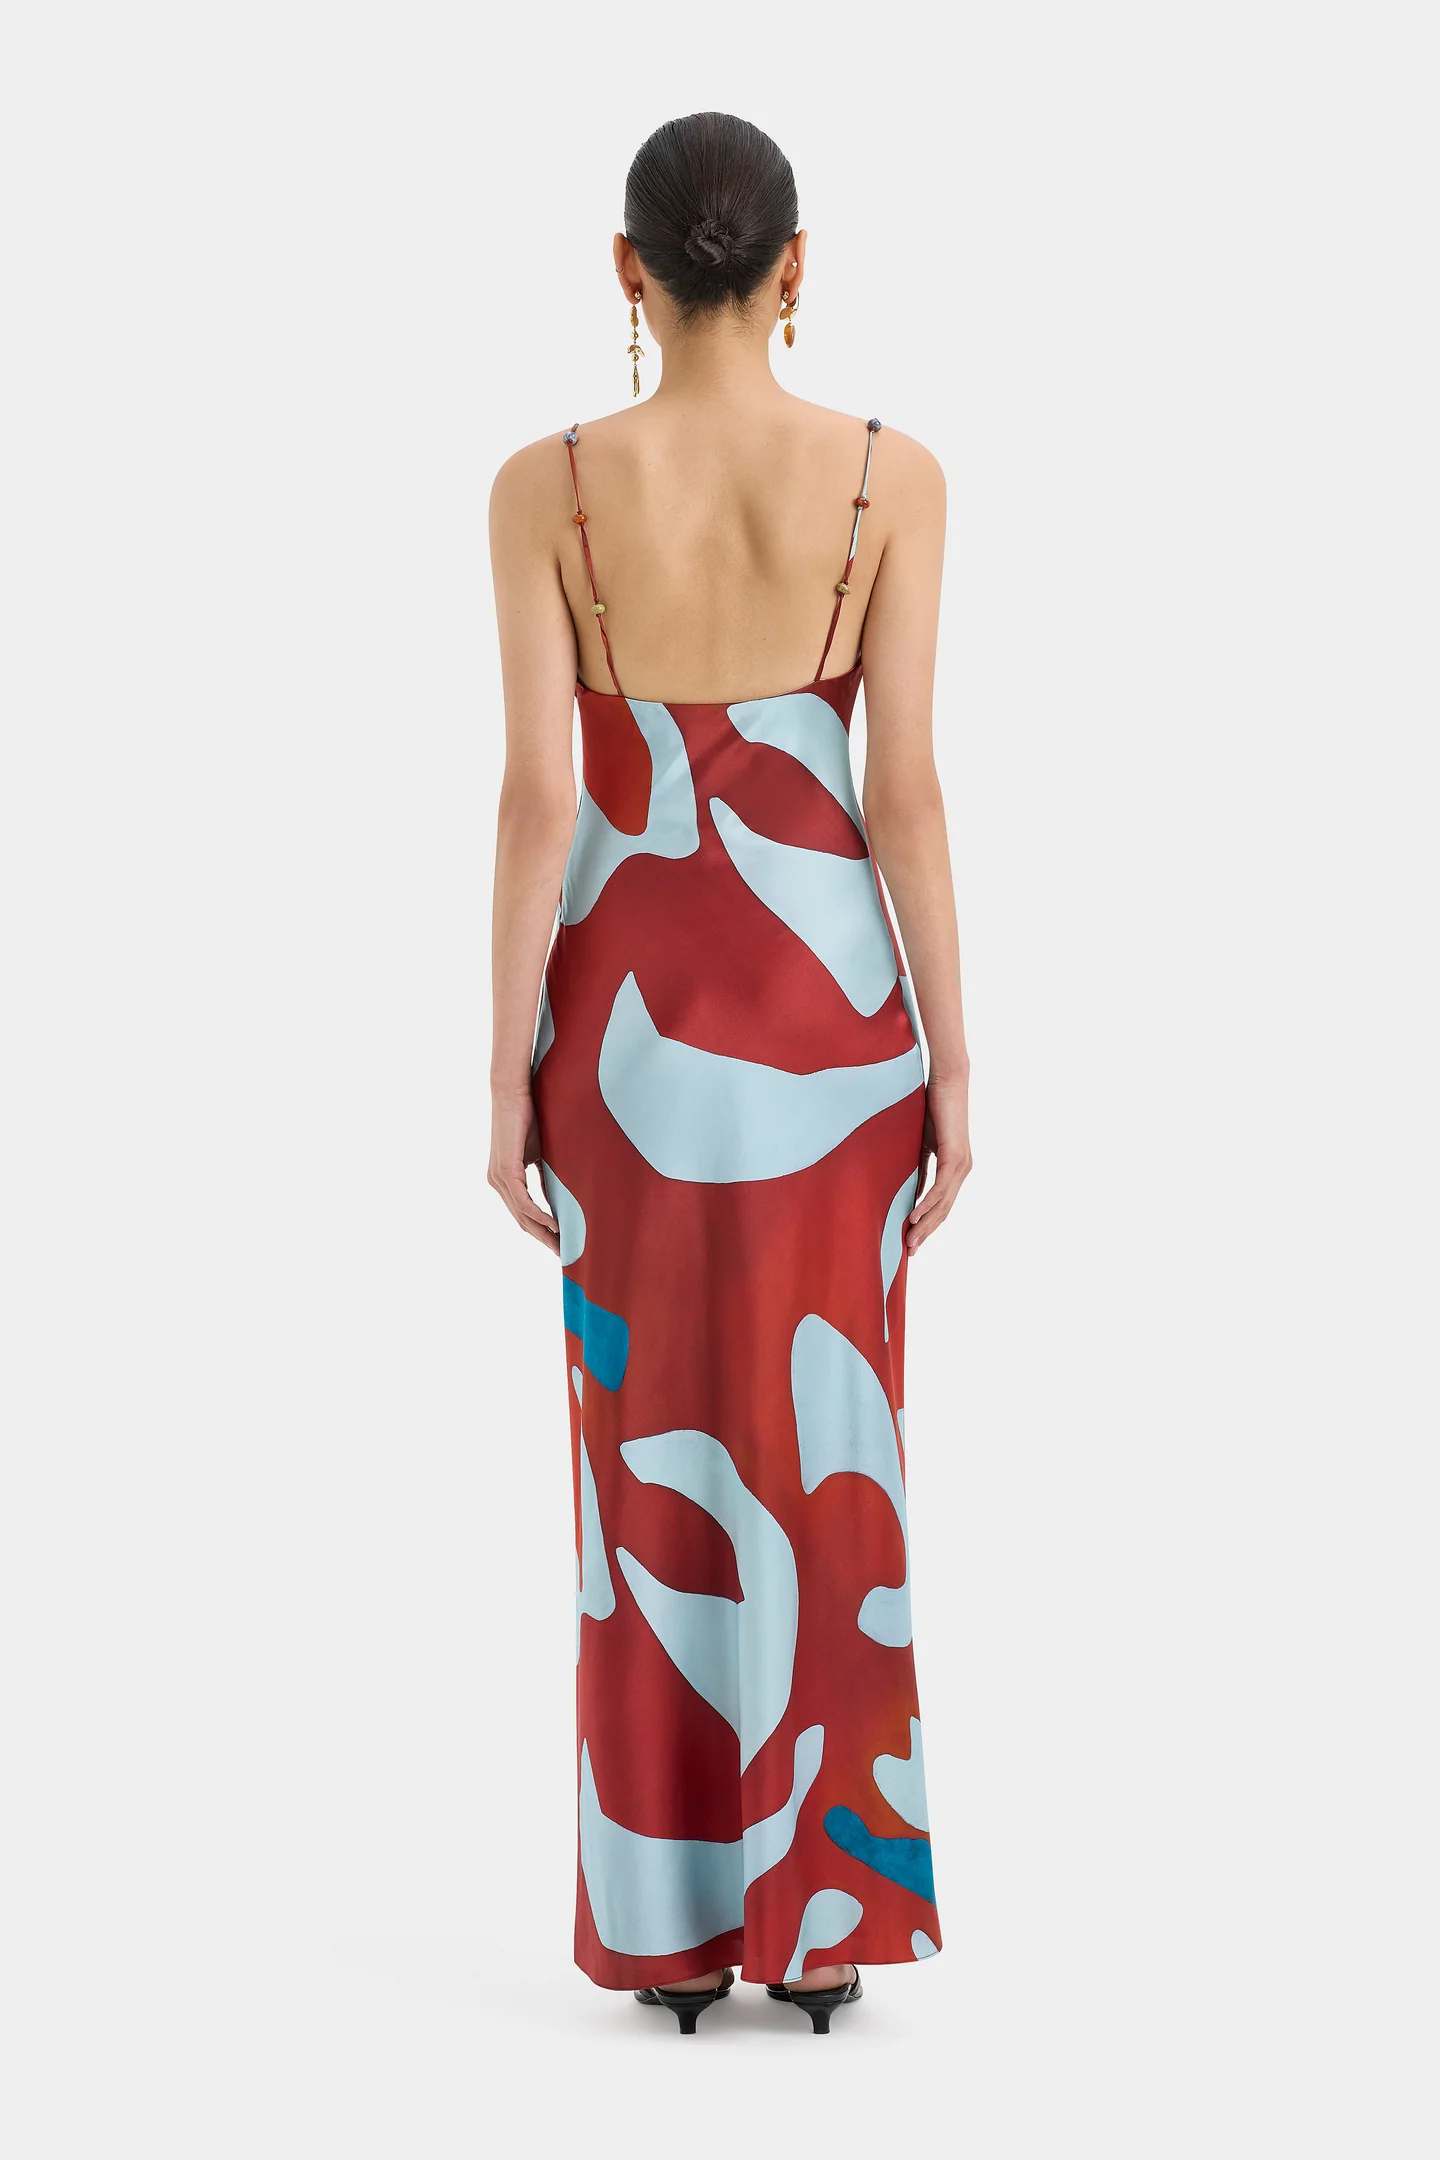 SIR Frankie Slip Dress in Ruby Reflection available at The New Trend Australia.